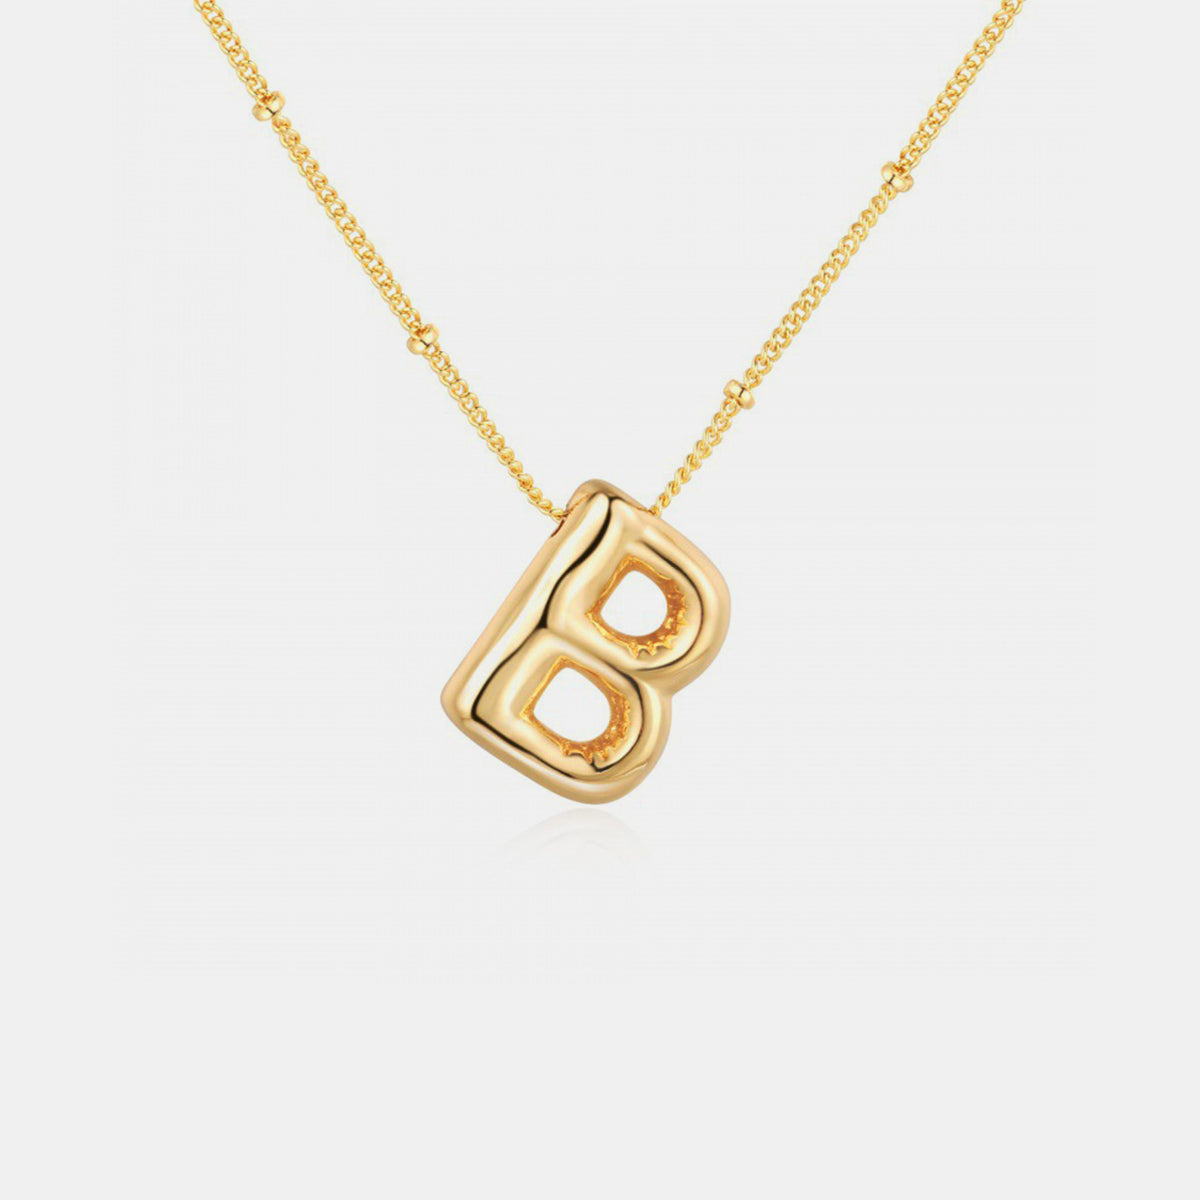 TEEK - A-J Gold-Plated Letter Necklace JEWELRY TEEK Trend Style B  